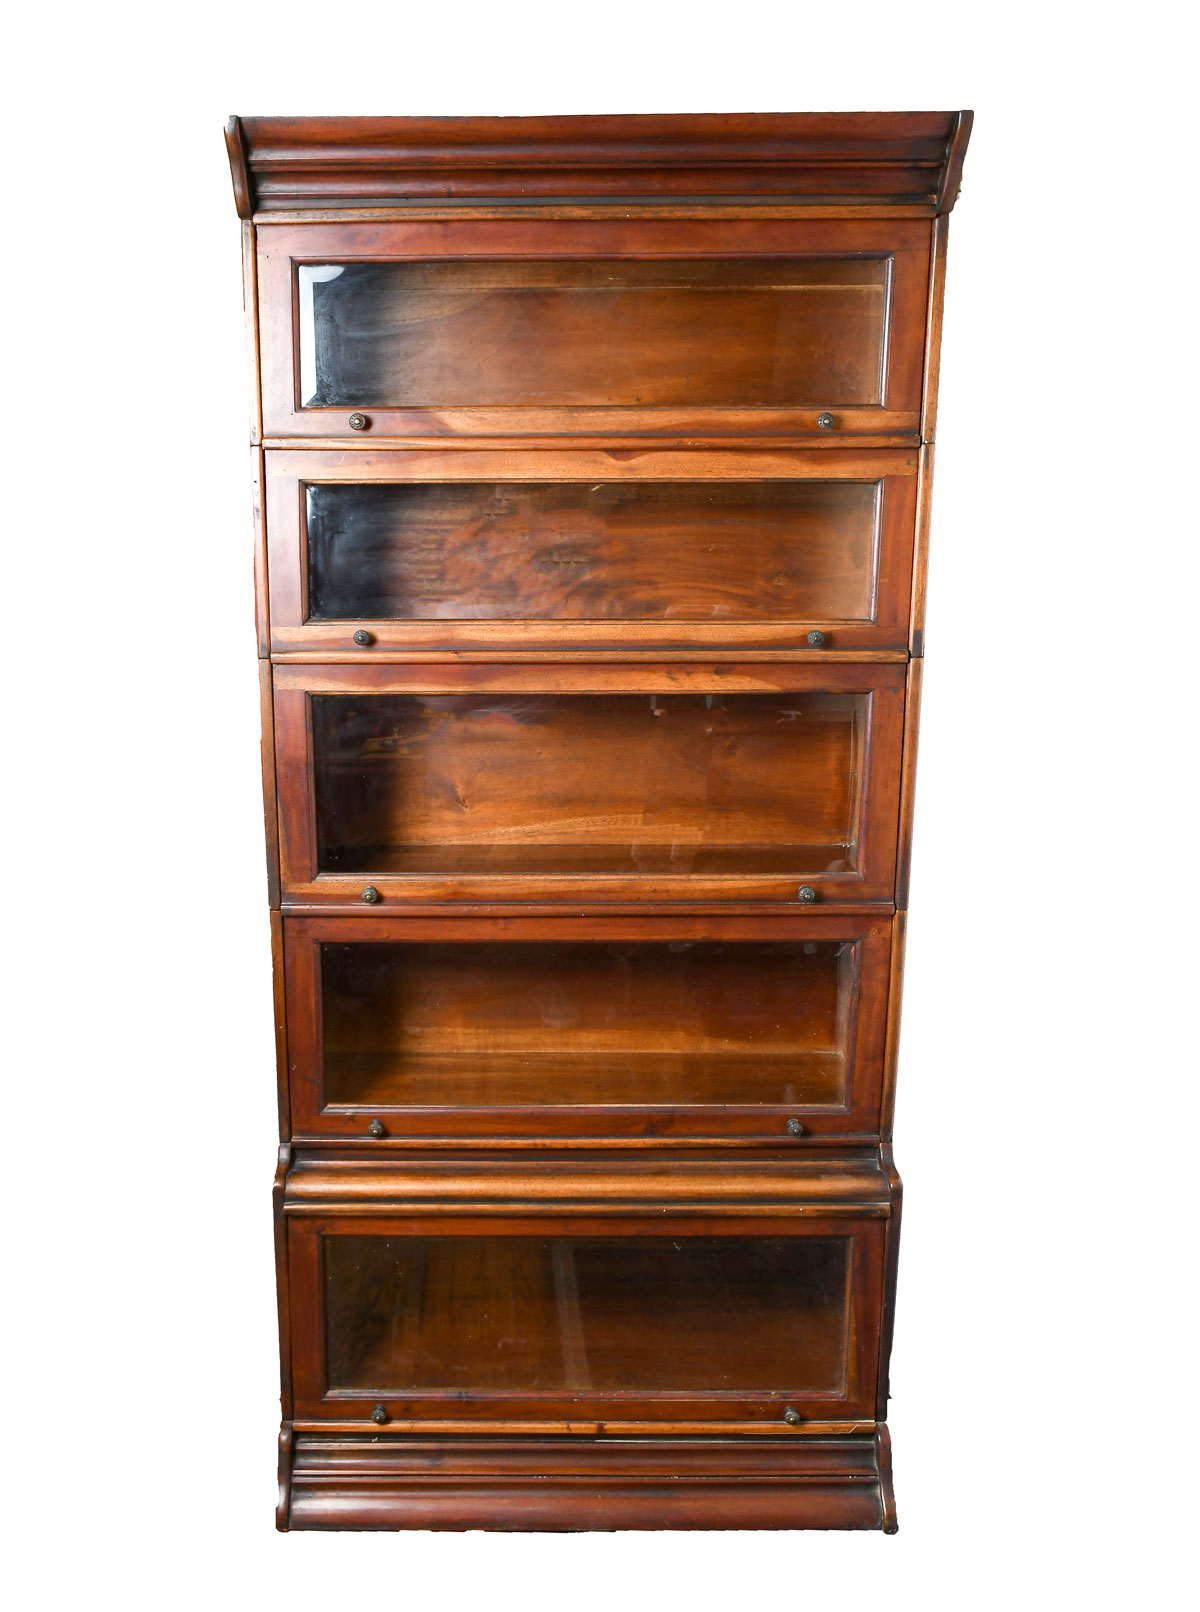 5 STACK BARRISTER BOOKCASE: Early